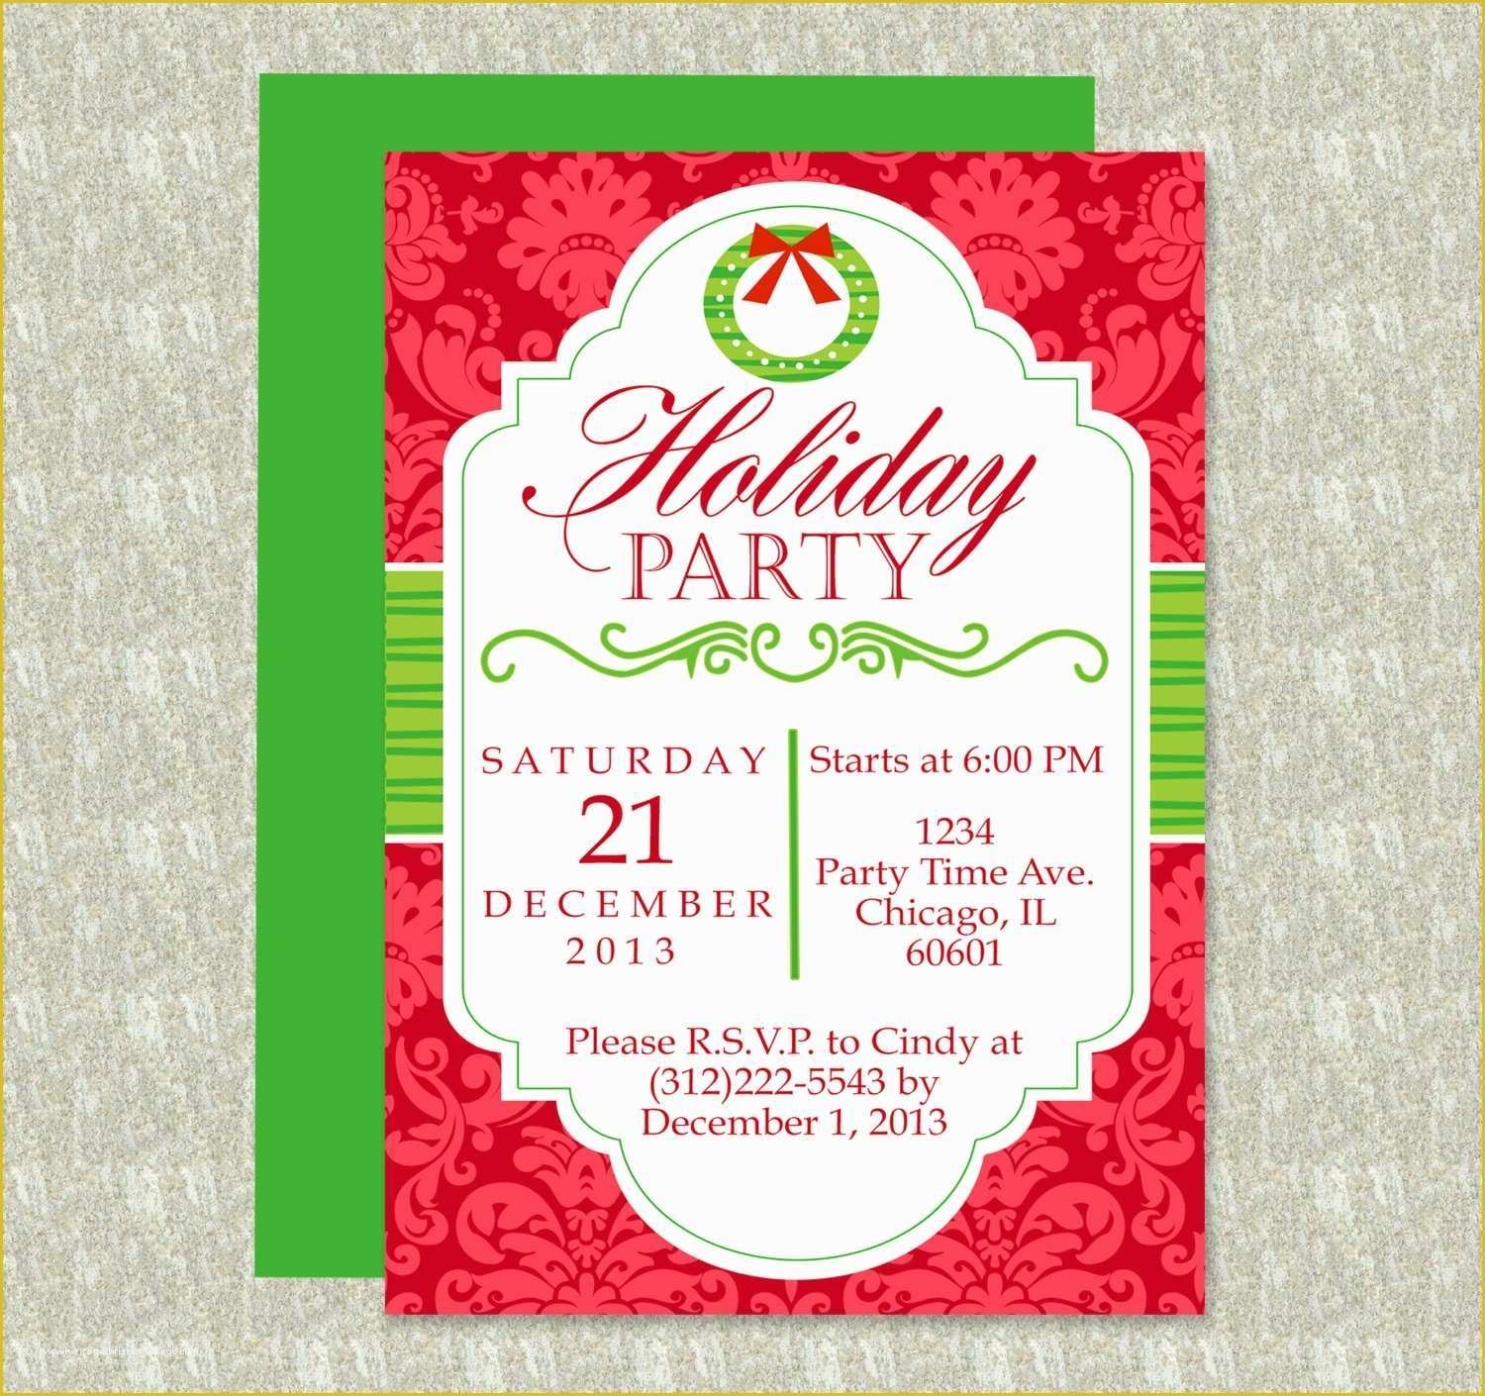 Office Christmas Party Flyer Templates Free Of Holiday Party Invitation Editable Template Pertaining To Free Microsoft Office Flyer Templates